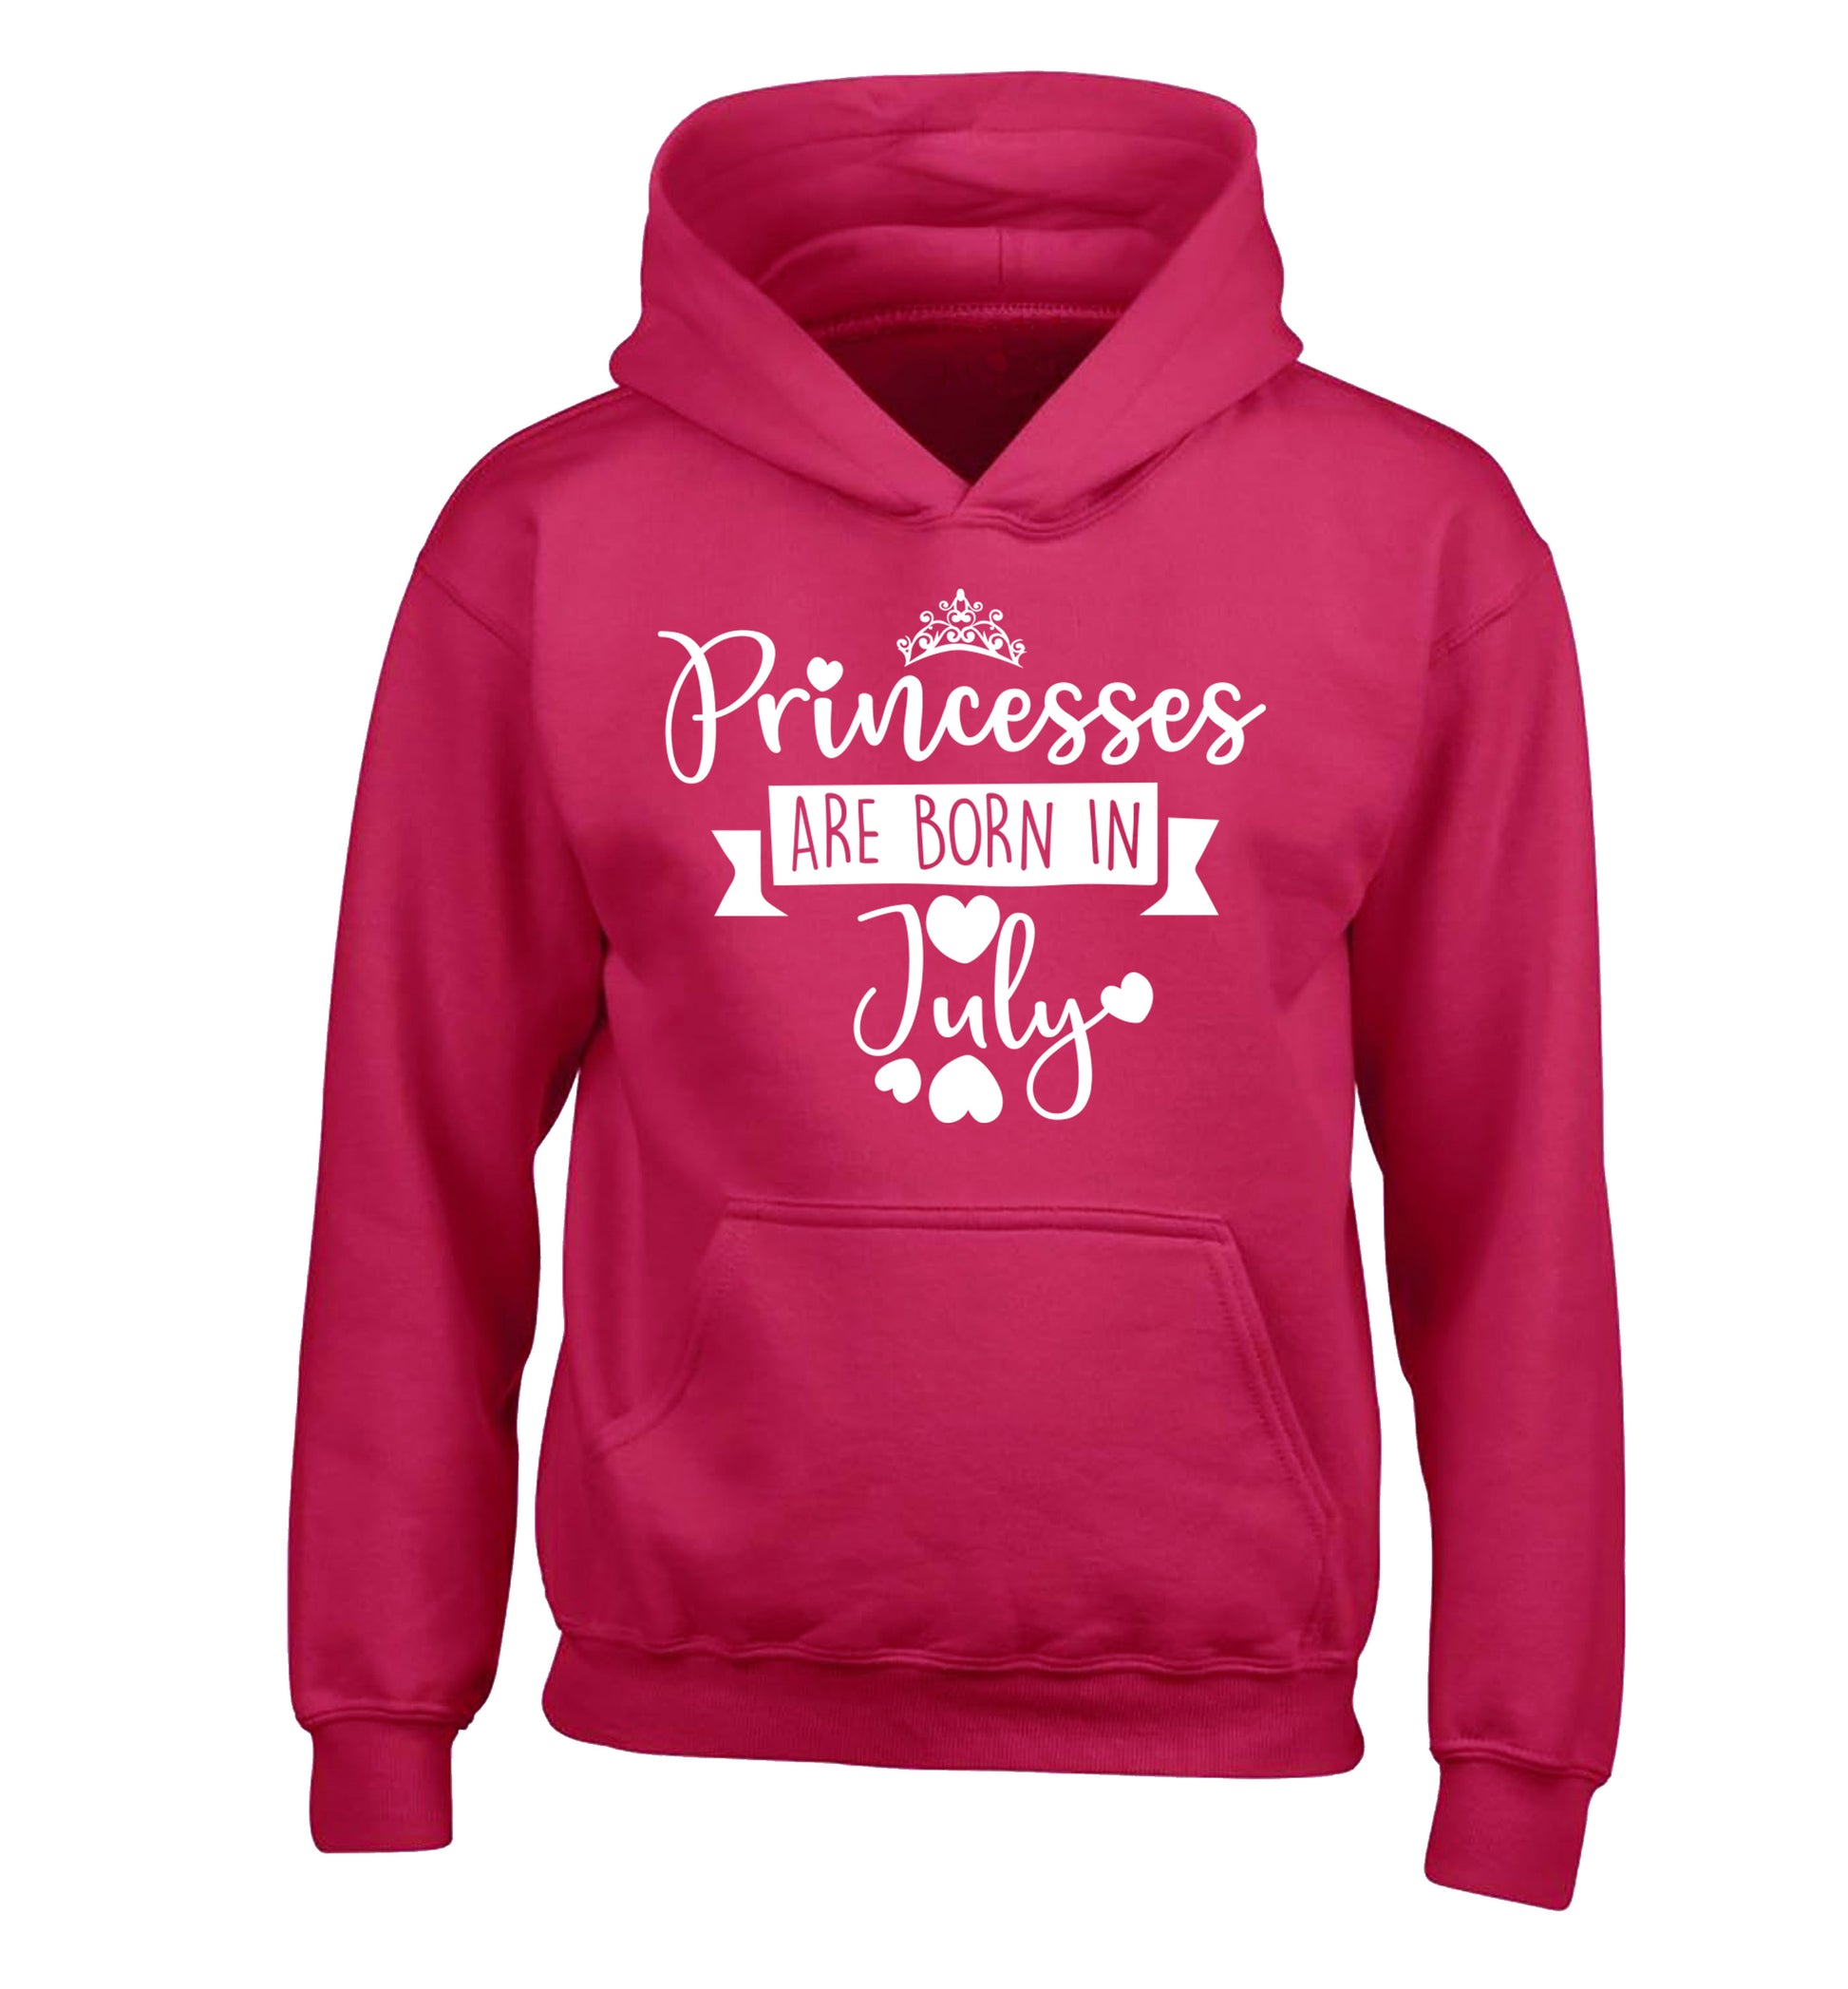 Princesses are born in July children's pink hoodie 12-13 Years